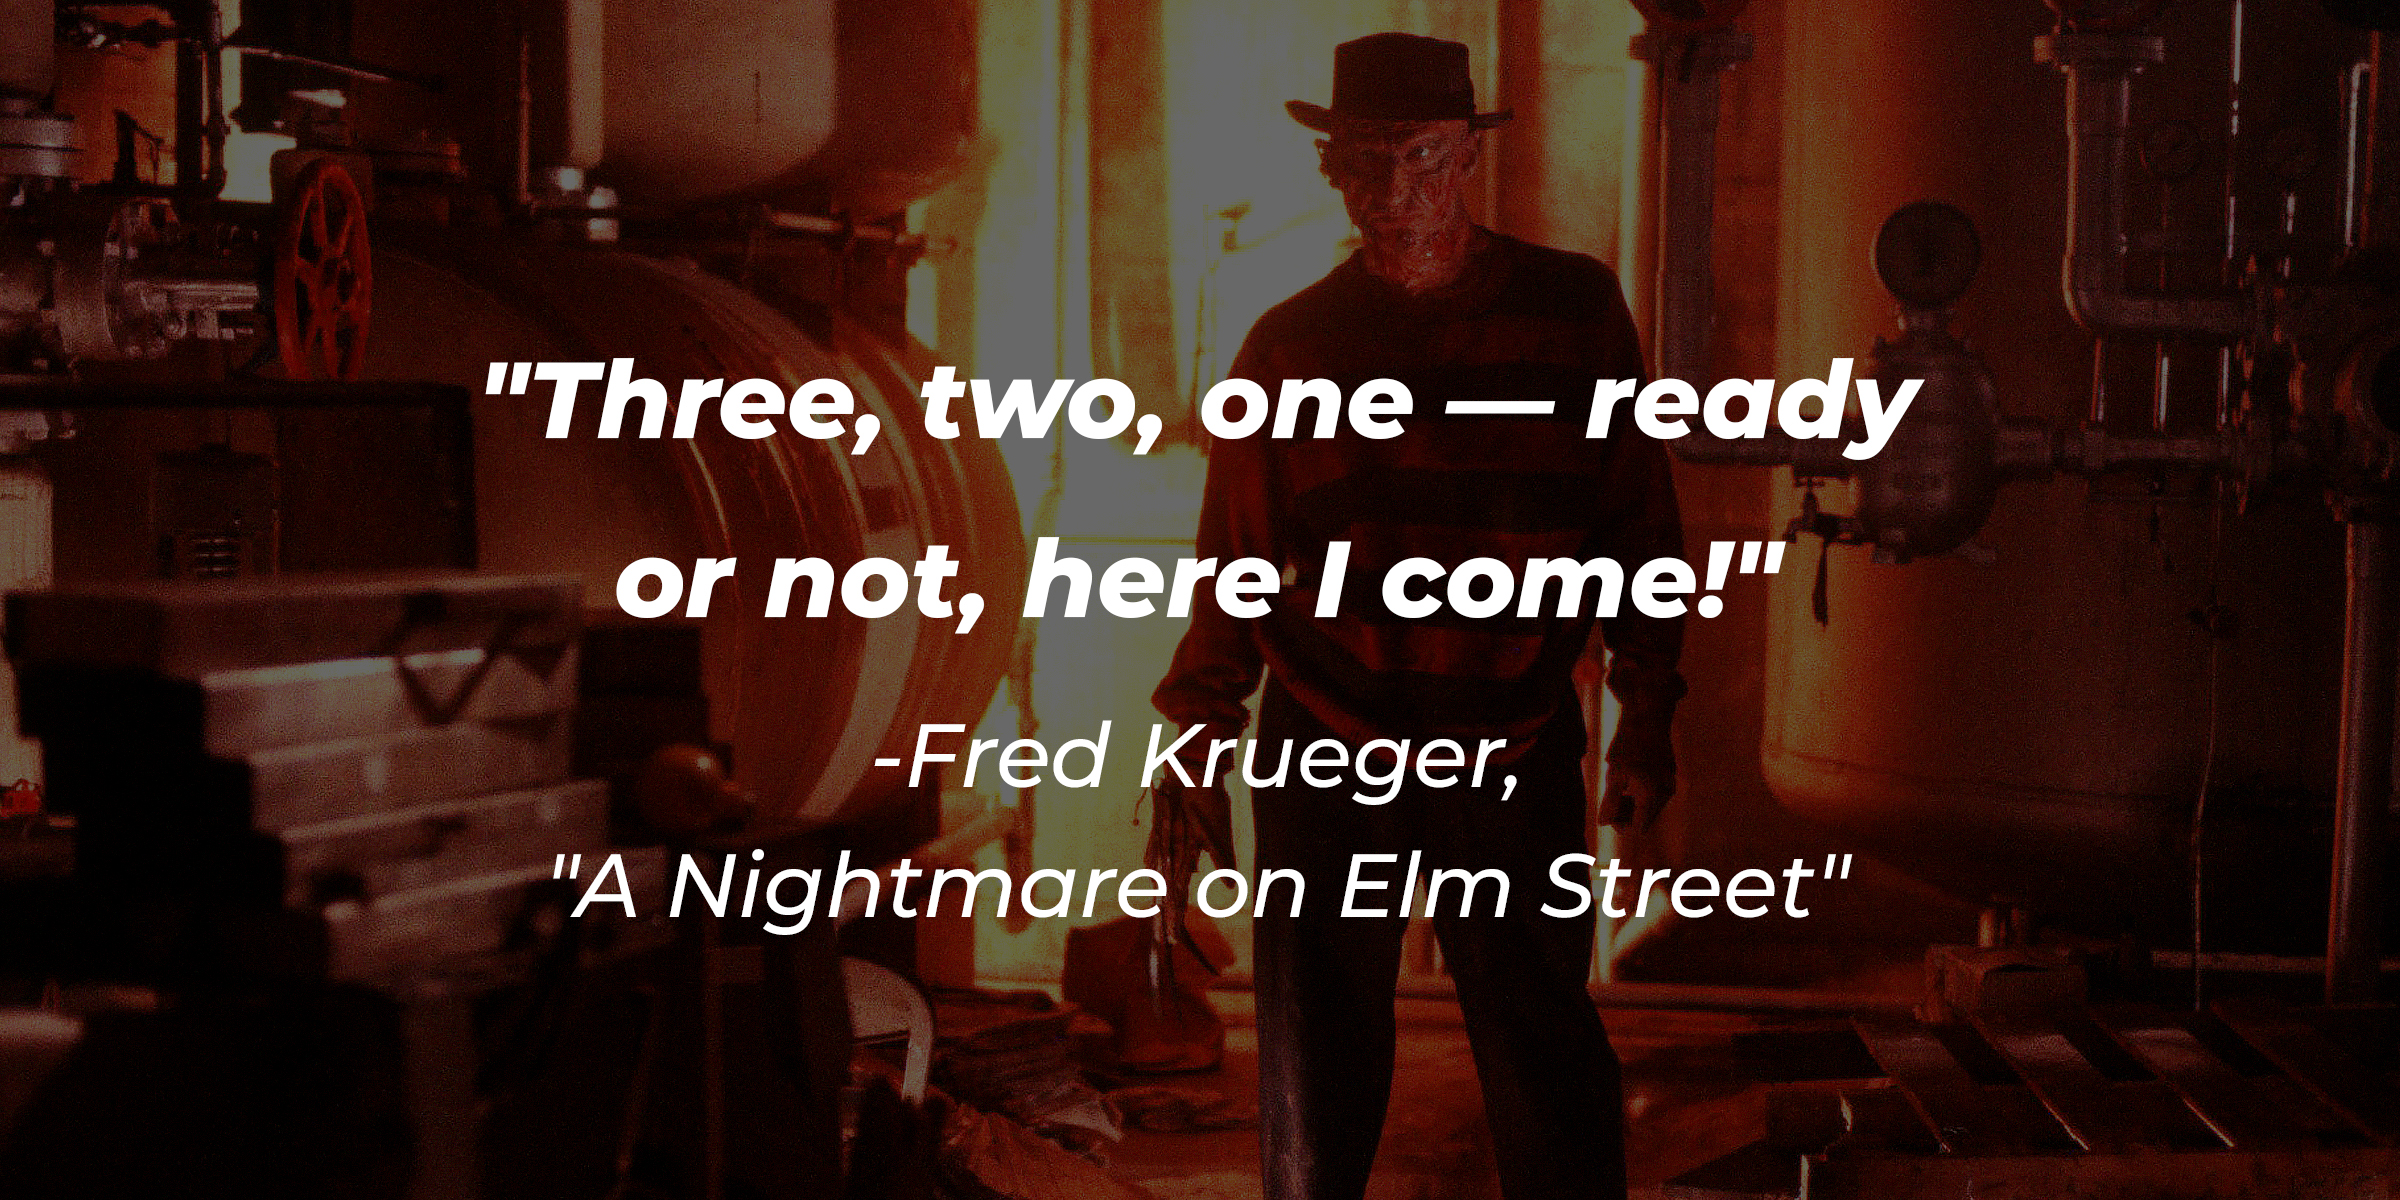 An image of Freddy Krueger with his quote: "Three, two, one—ready or not, here I come!" | Source: Facebook/ANightmareonElmStreet